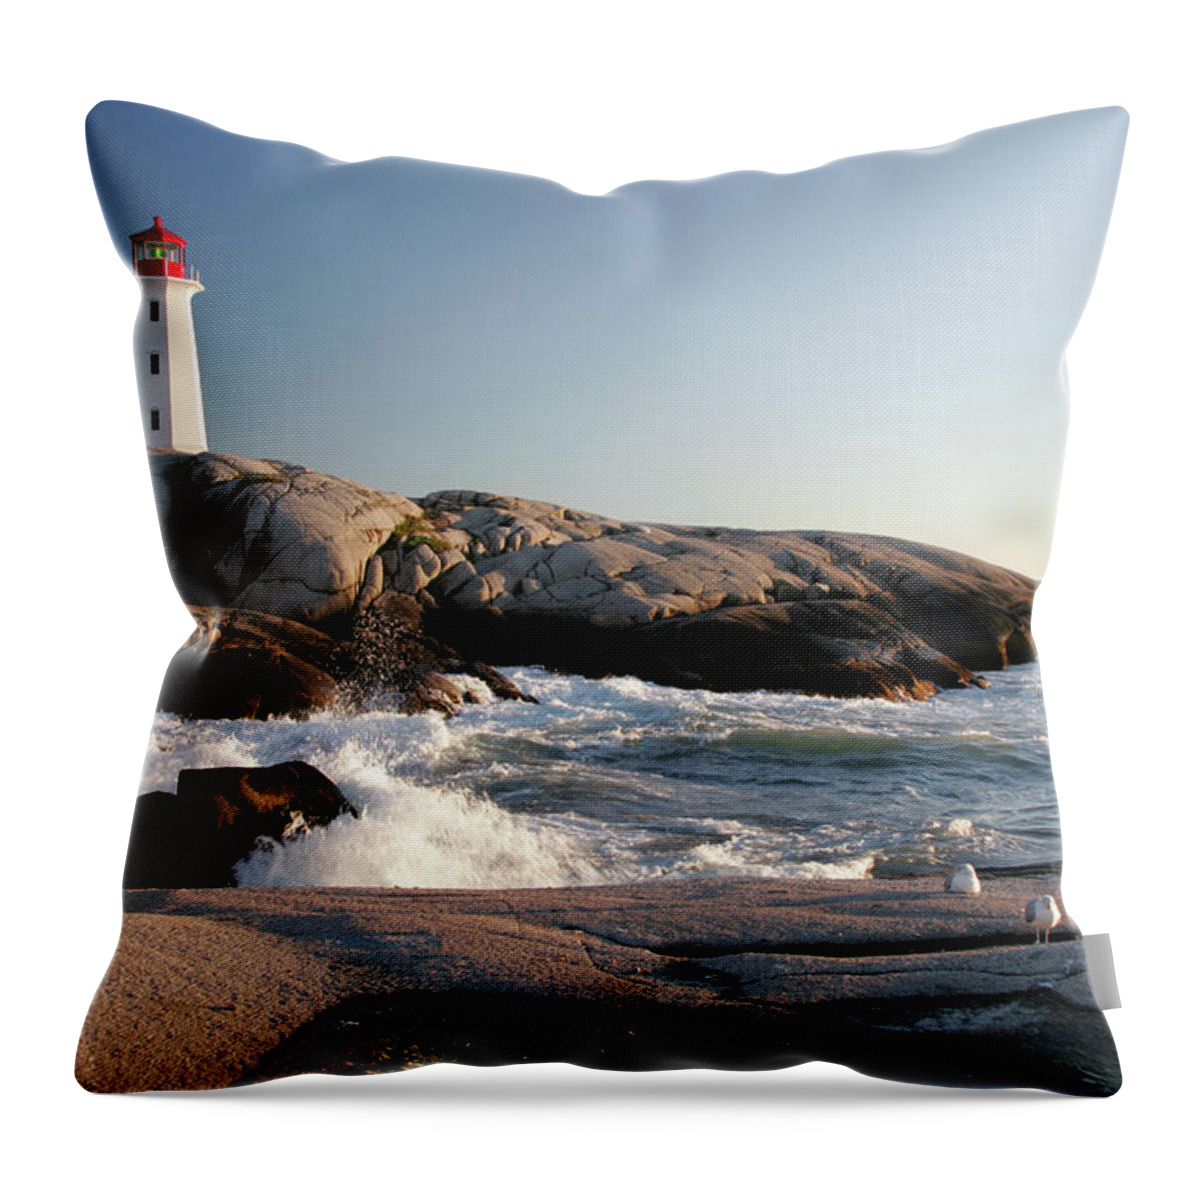 Water's Edge Throw Pillow featuring the photograph Peggys Cove Lighthouse & Waves by Cworthy